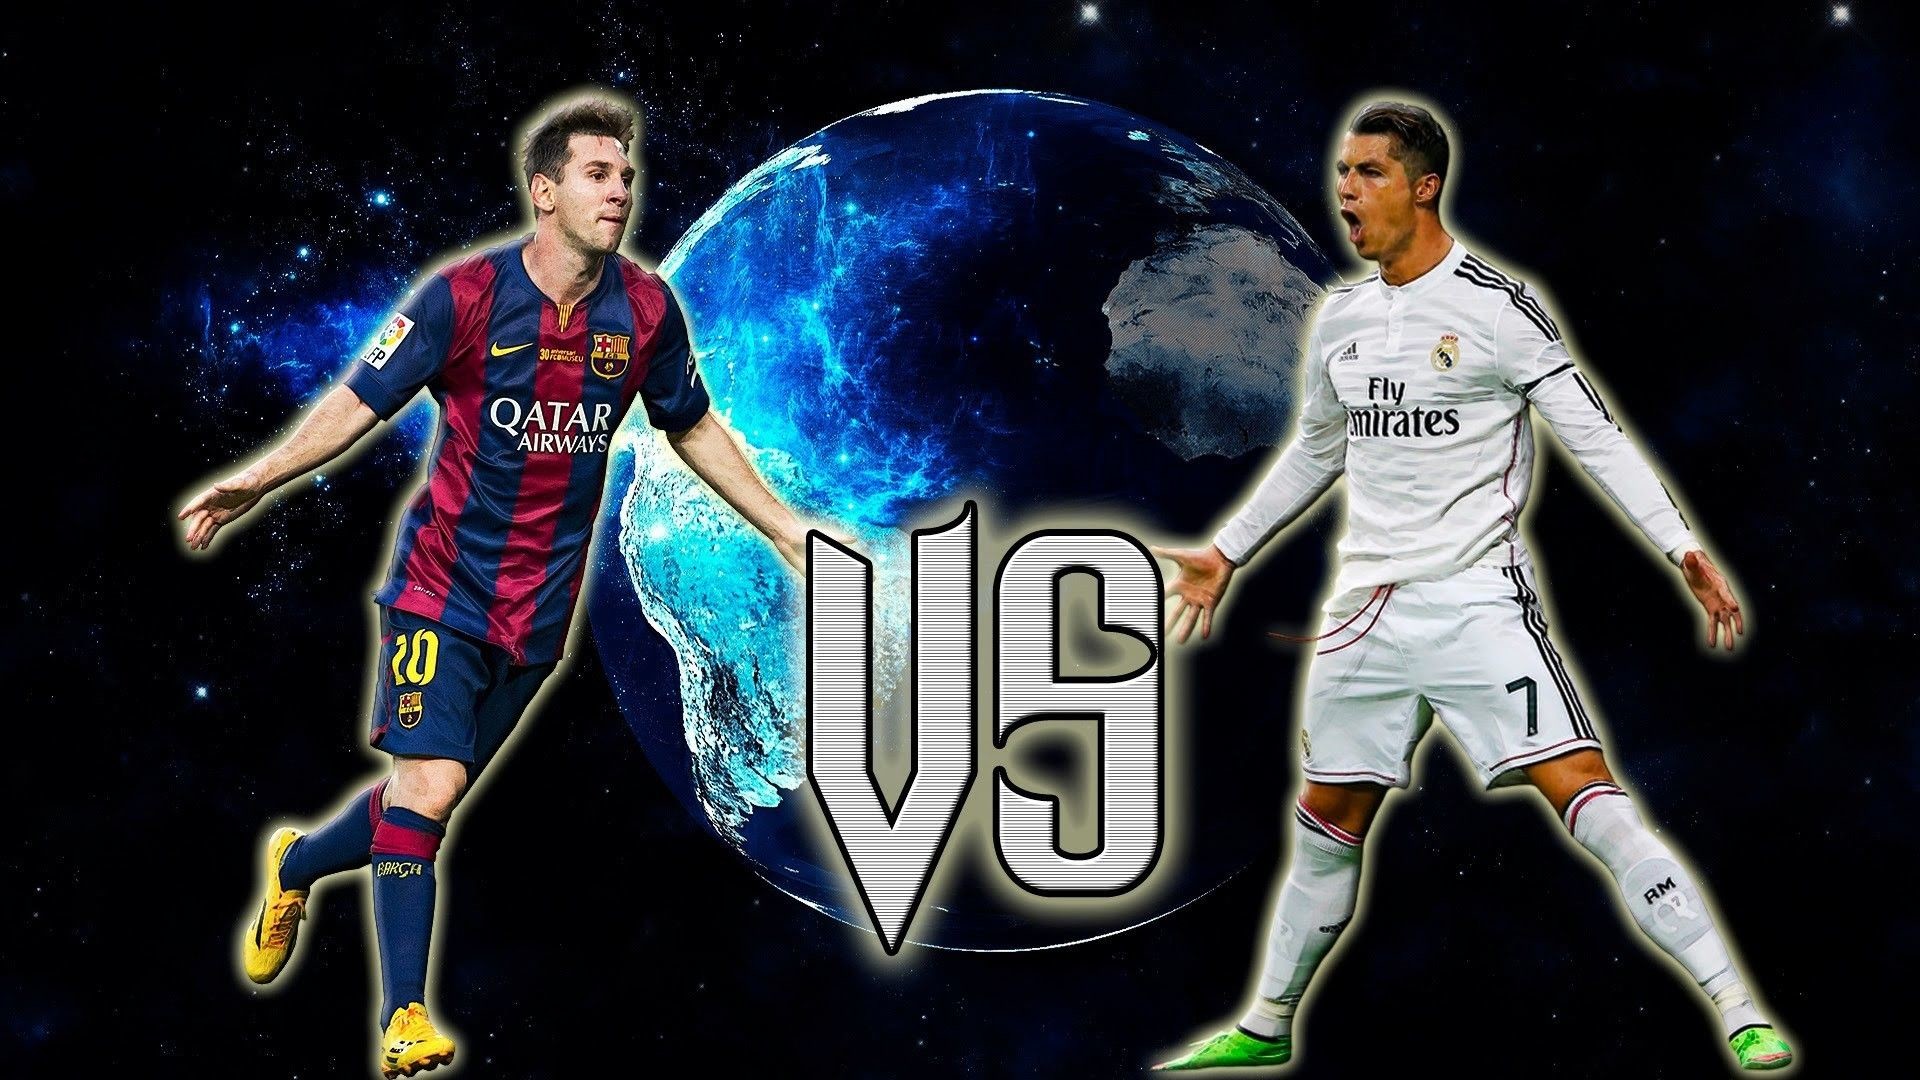 Messi and Ronaldo together cool wallpapers.